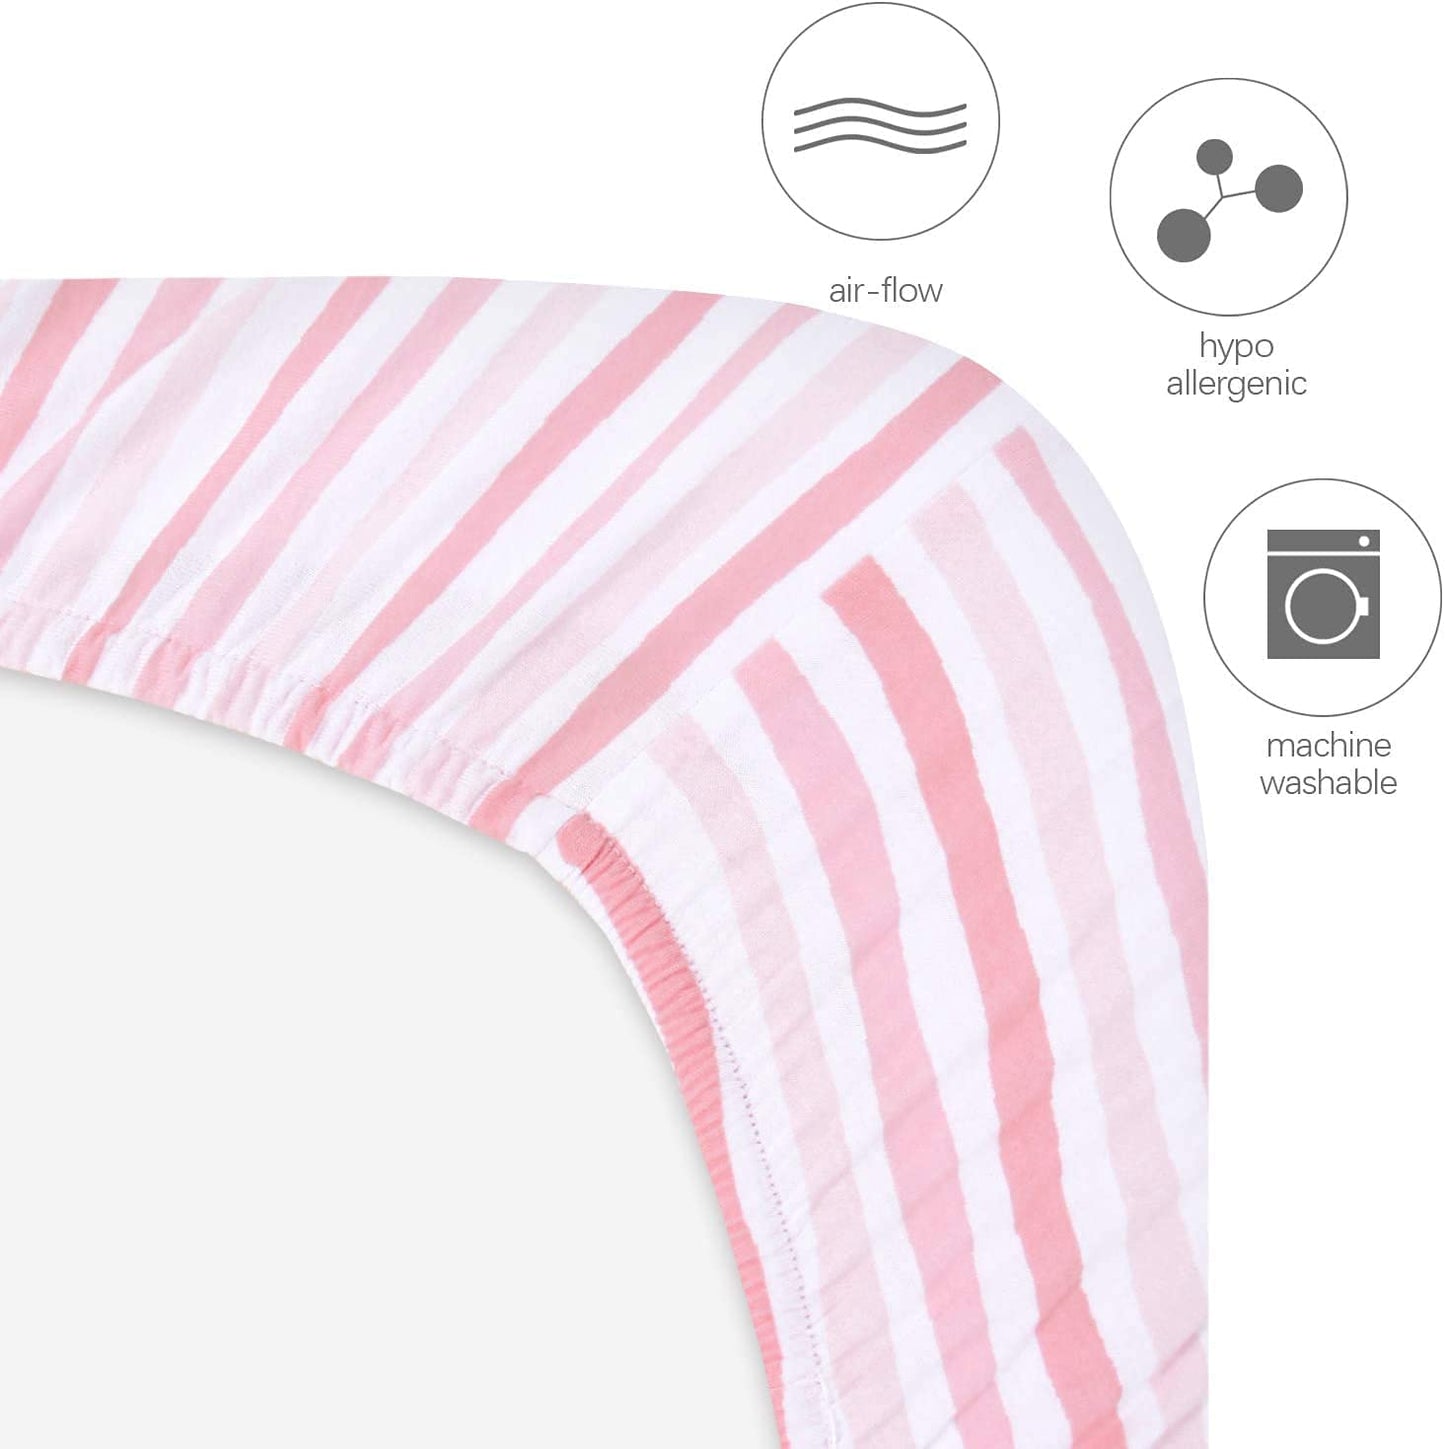 Customized - Personalized Sheets, 2 Pack, 100% Jersey Cotton - Biloban Online Store